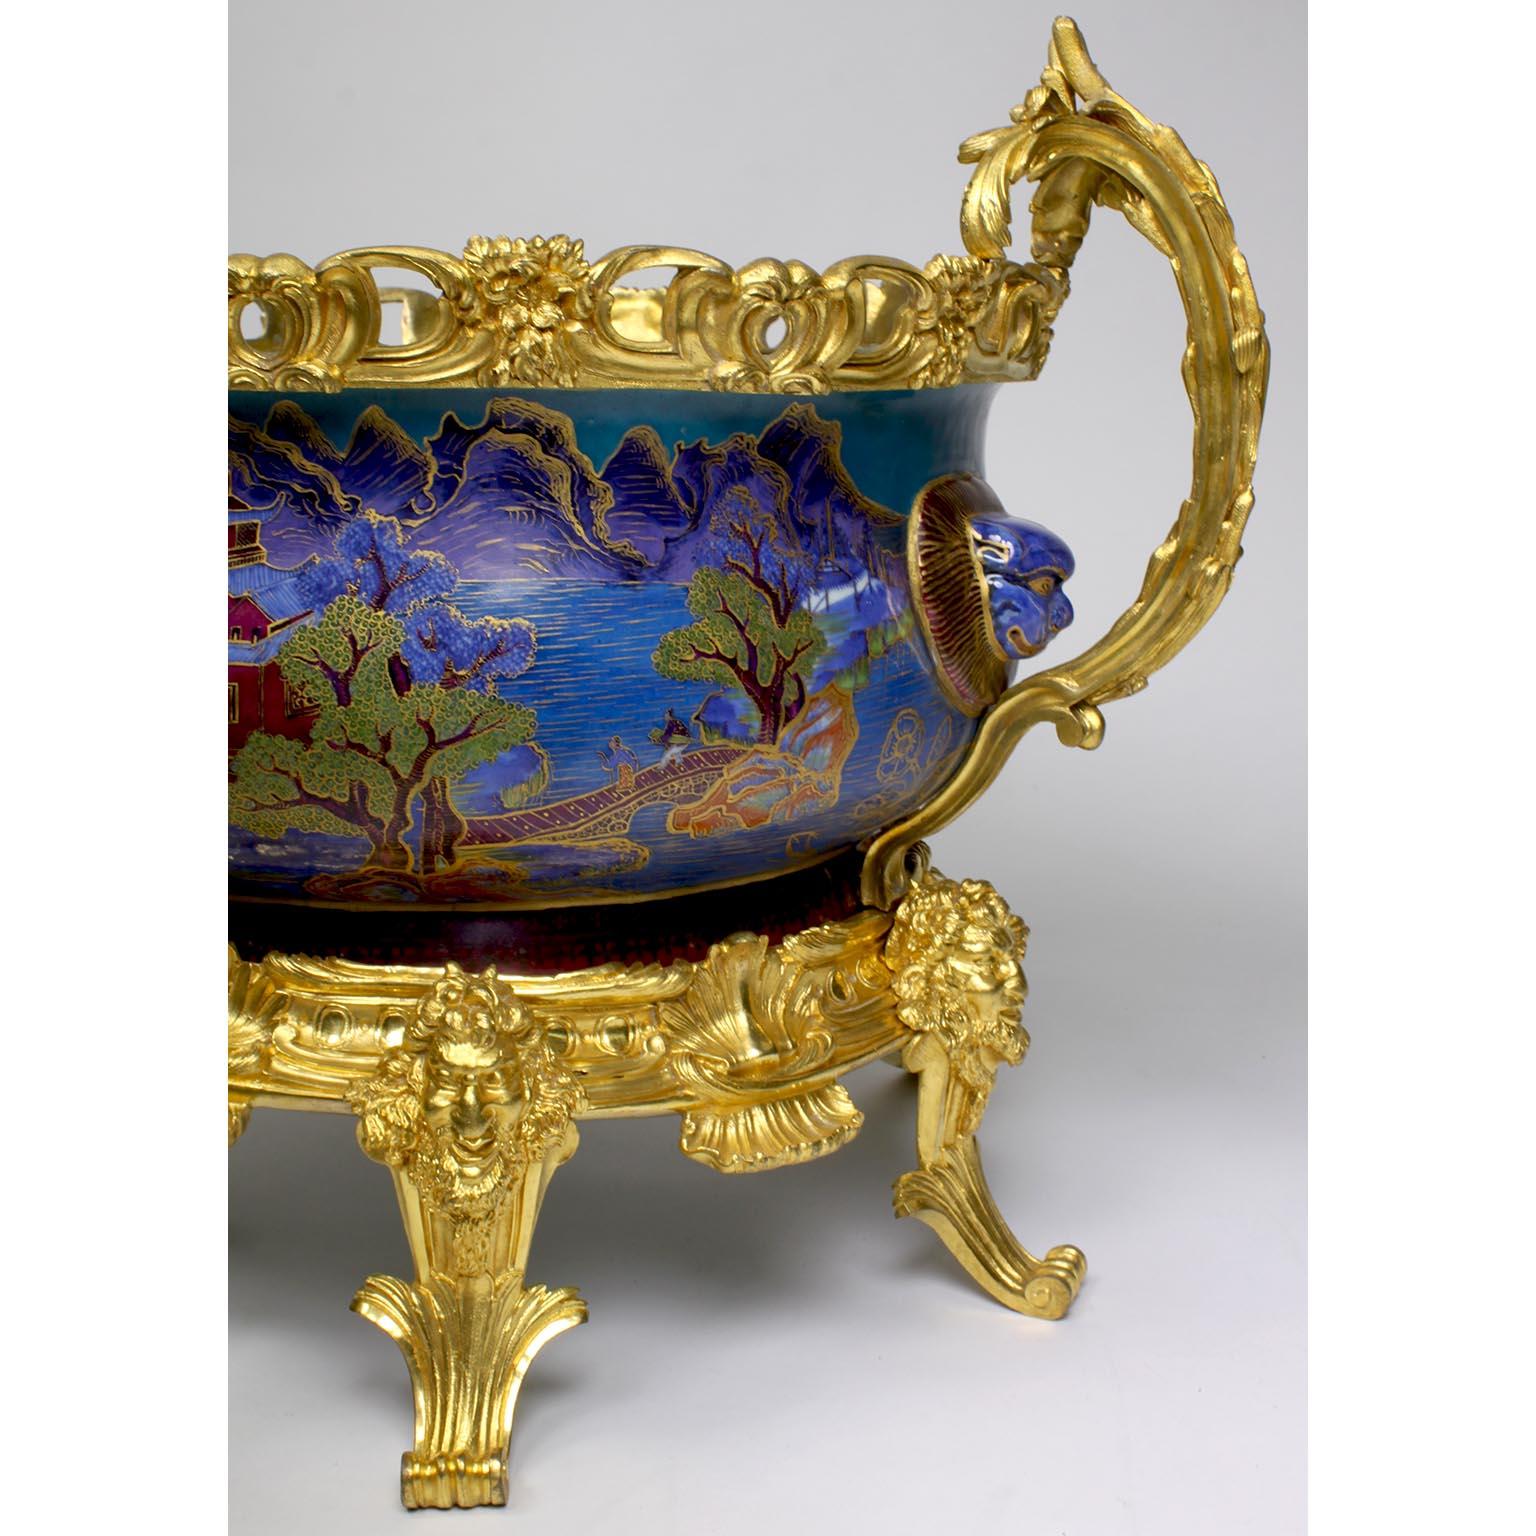 Chinese Export Famille Verte Porcelain & French Ormolu Chinoiserie Centerpiece For Sale 5